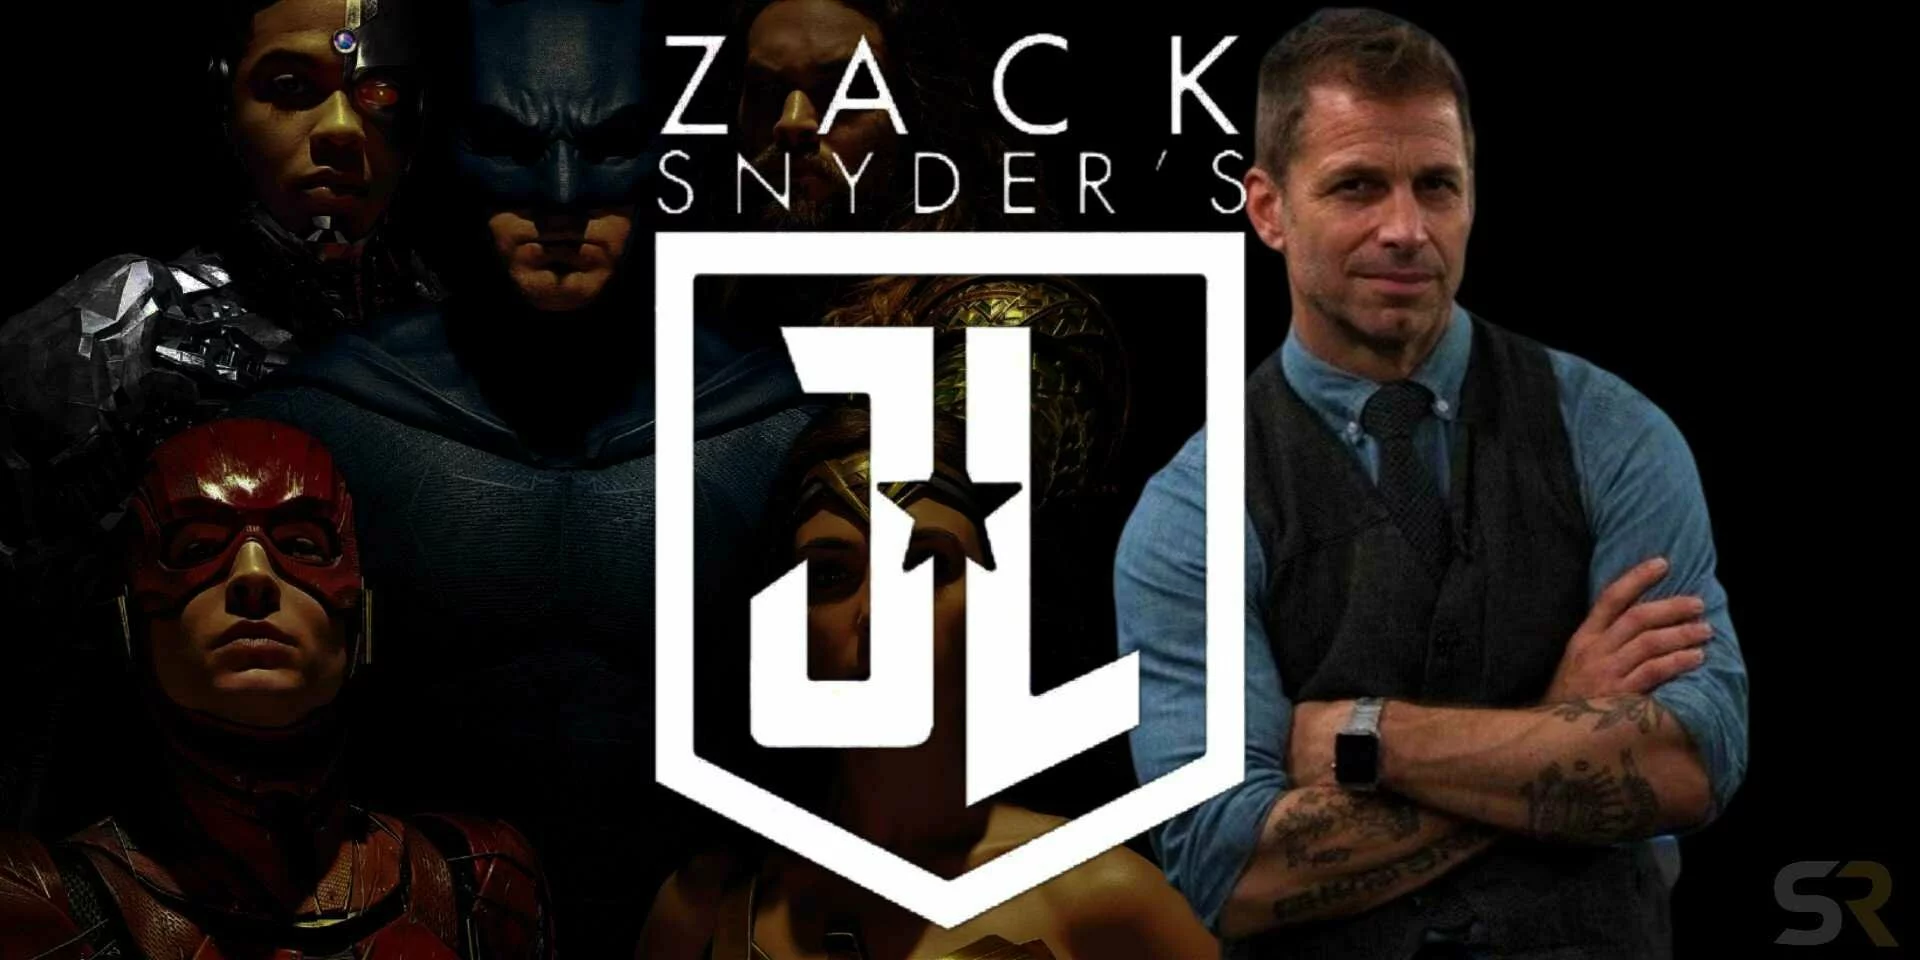 Zack Snyder's Justice League exists and fans won't stop campaigning for it, but can a release ever be expected? Here's everything you need to know.